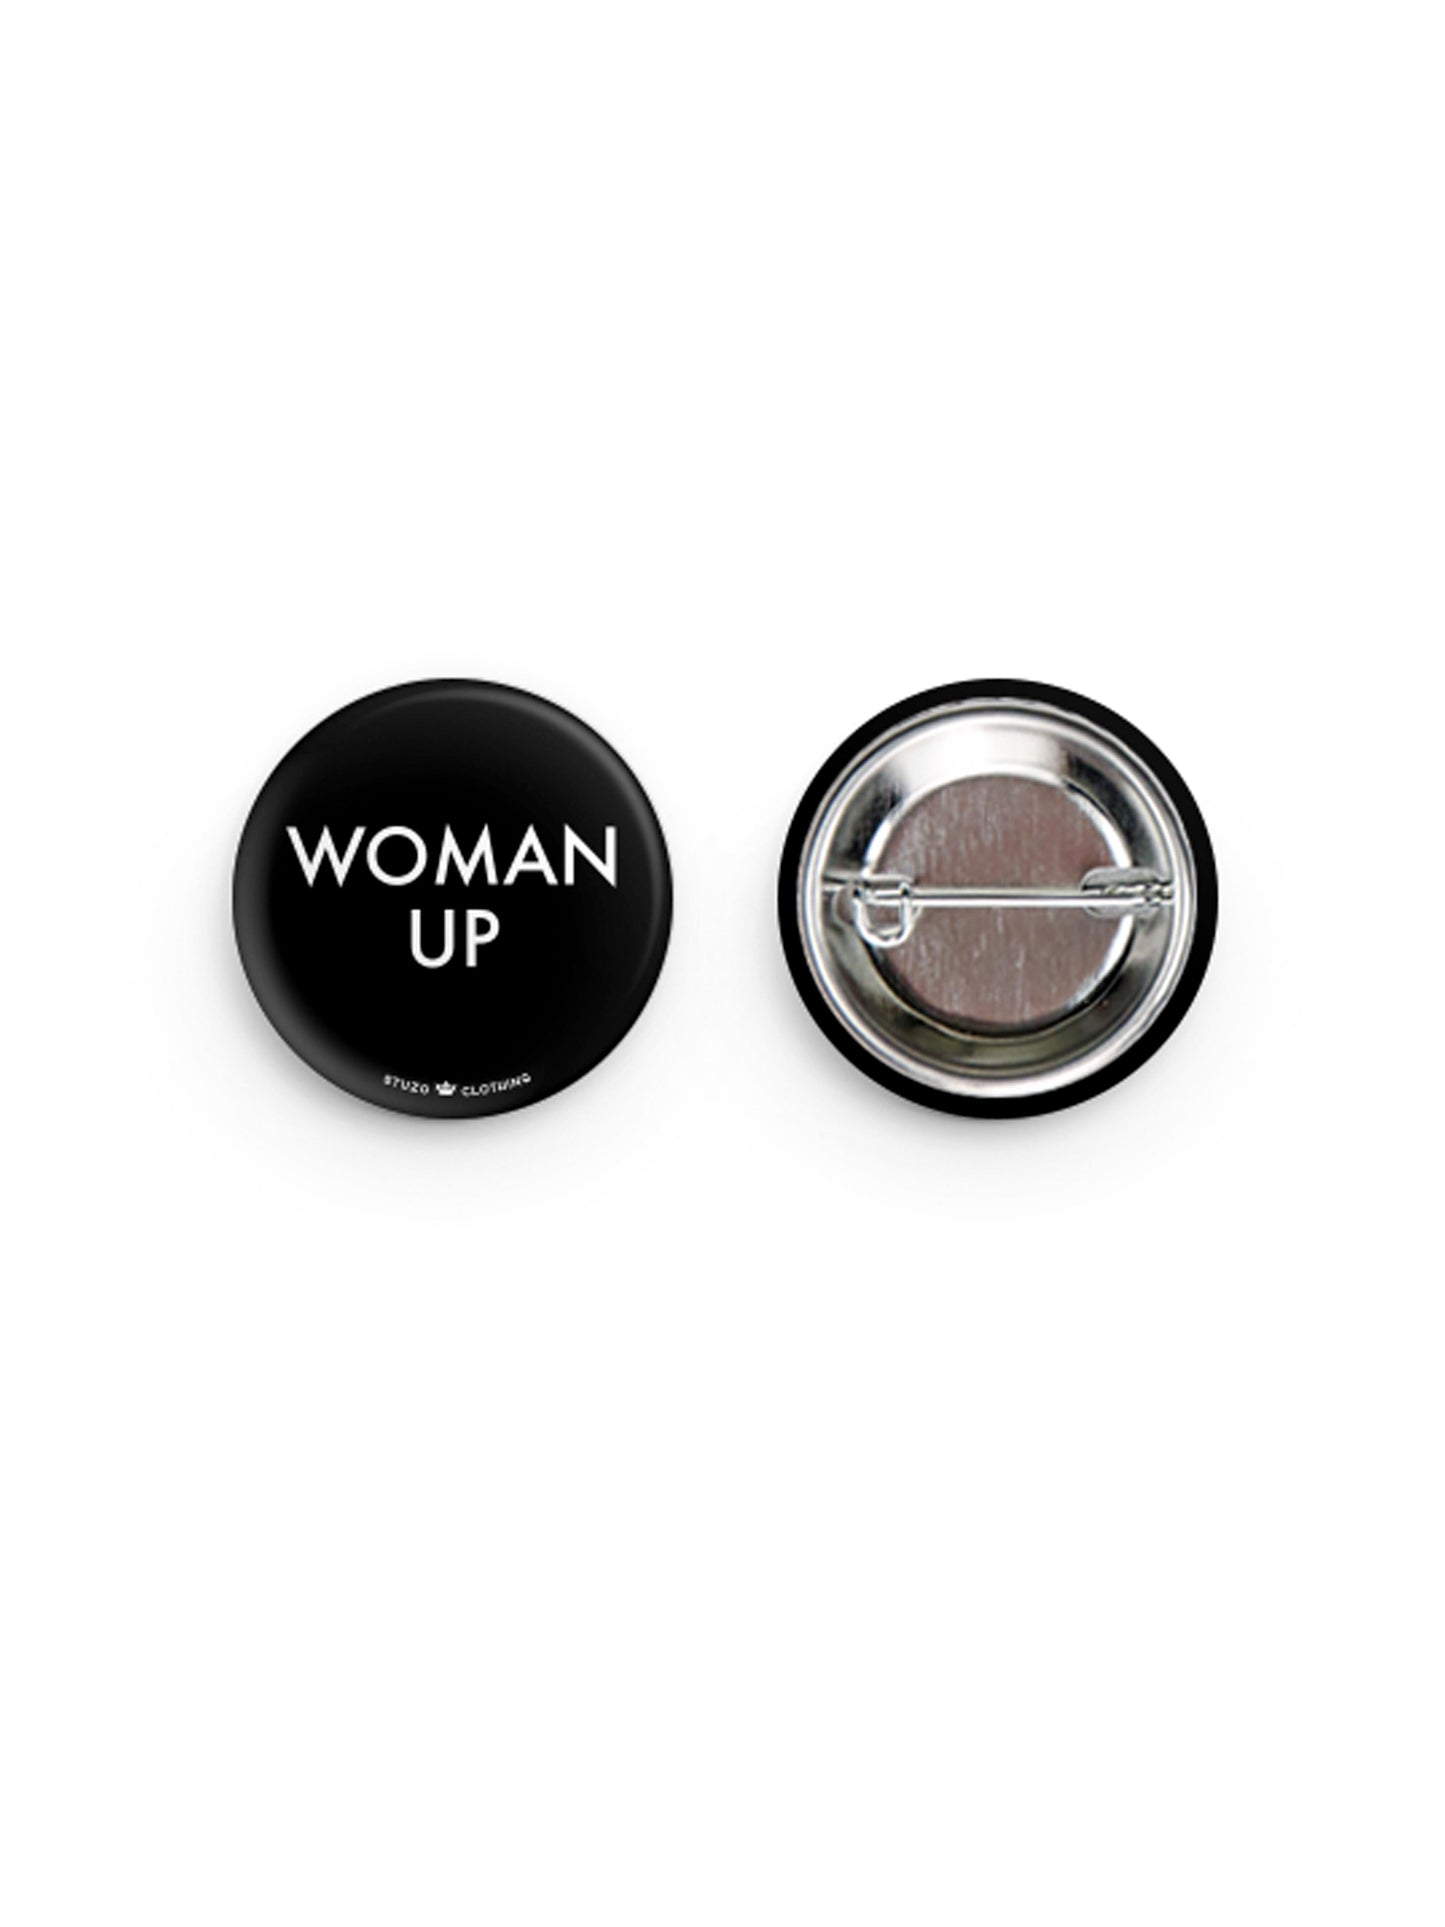 WOMAN UP BUTTONS